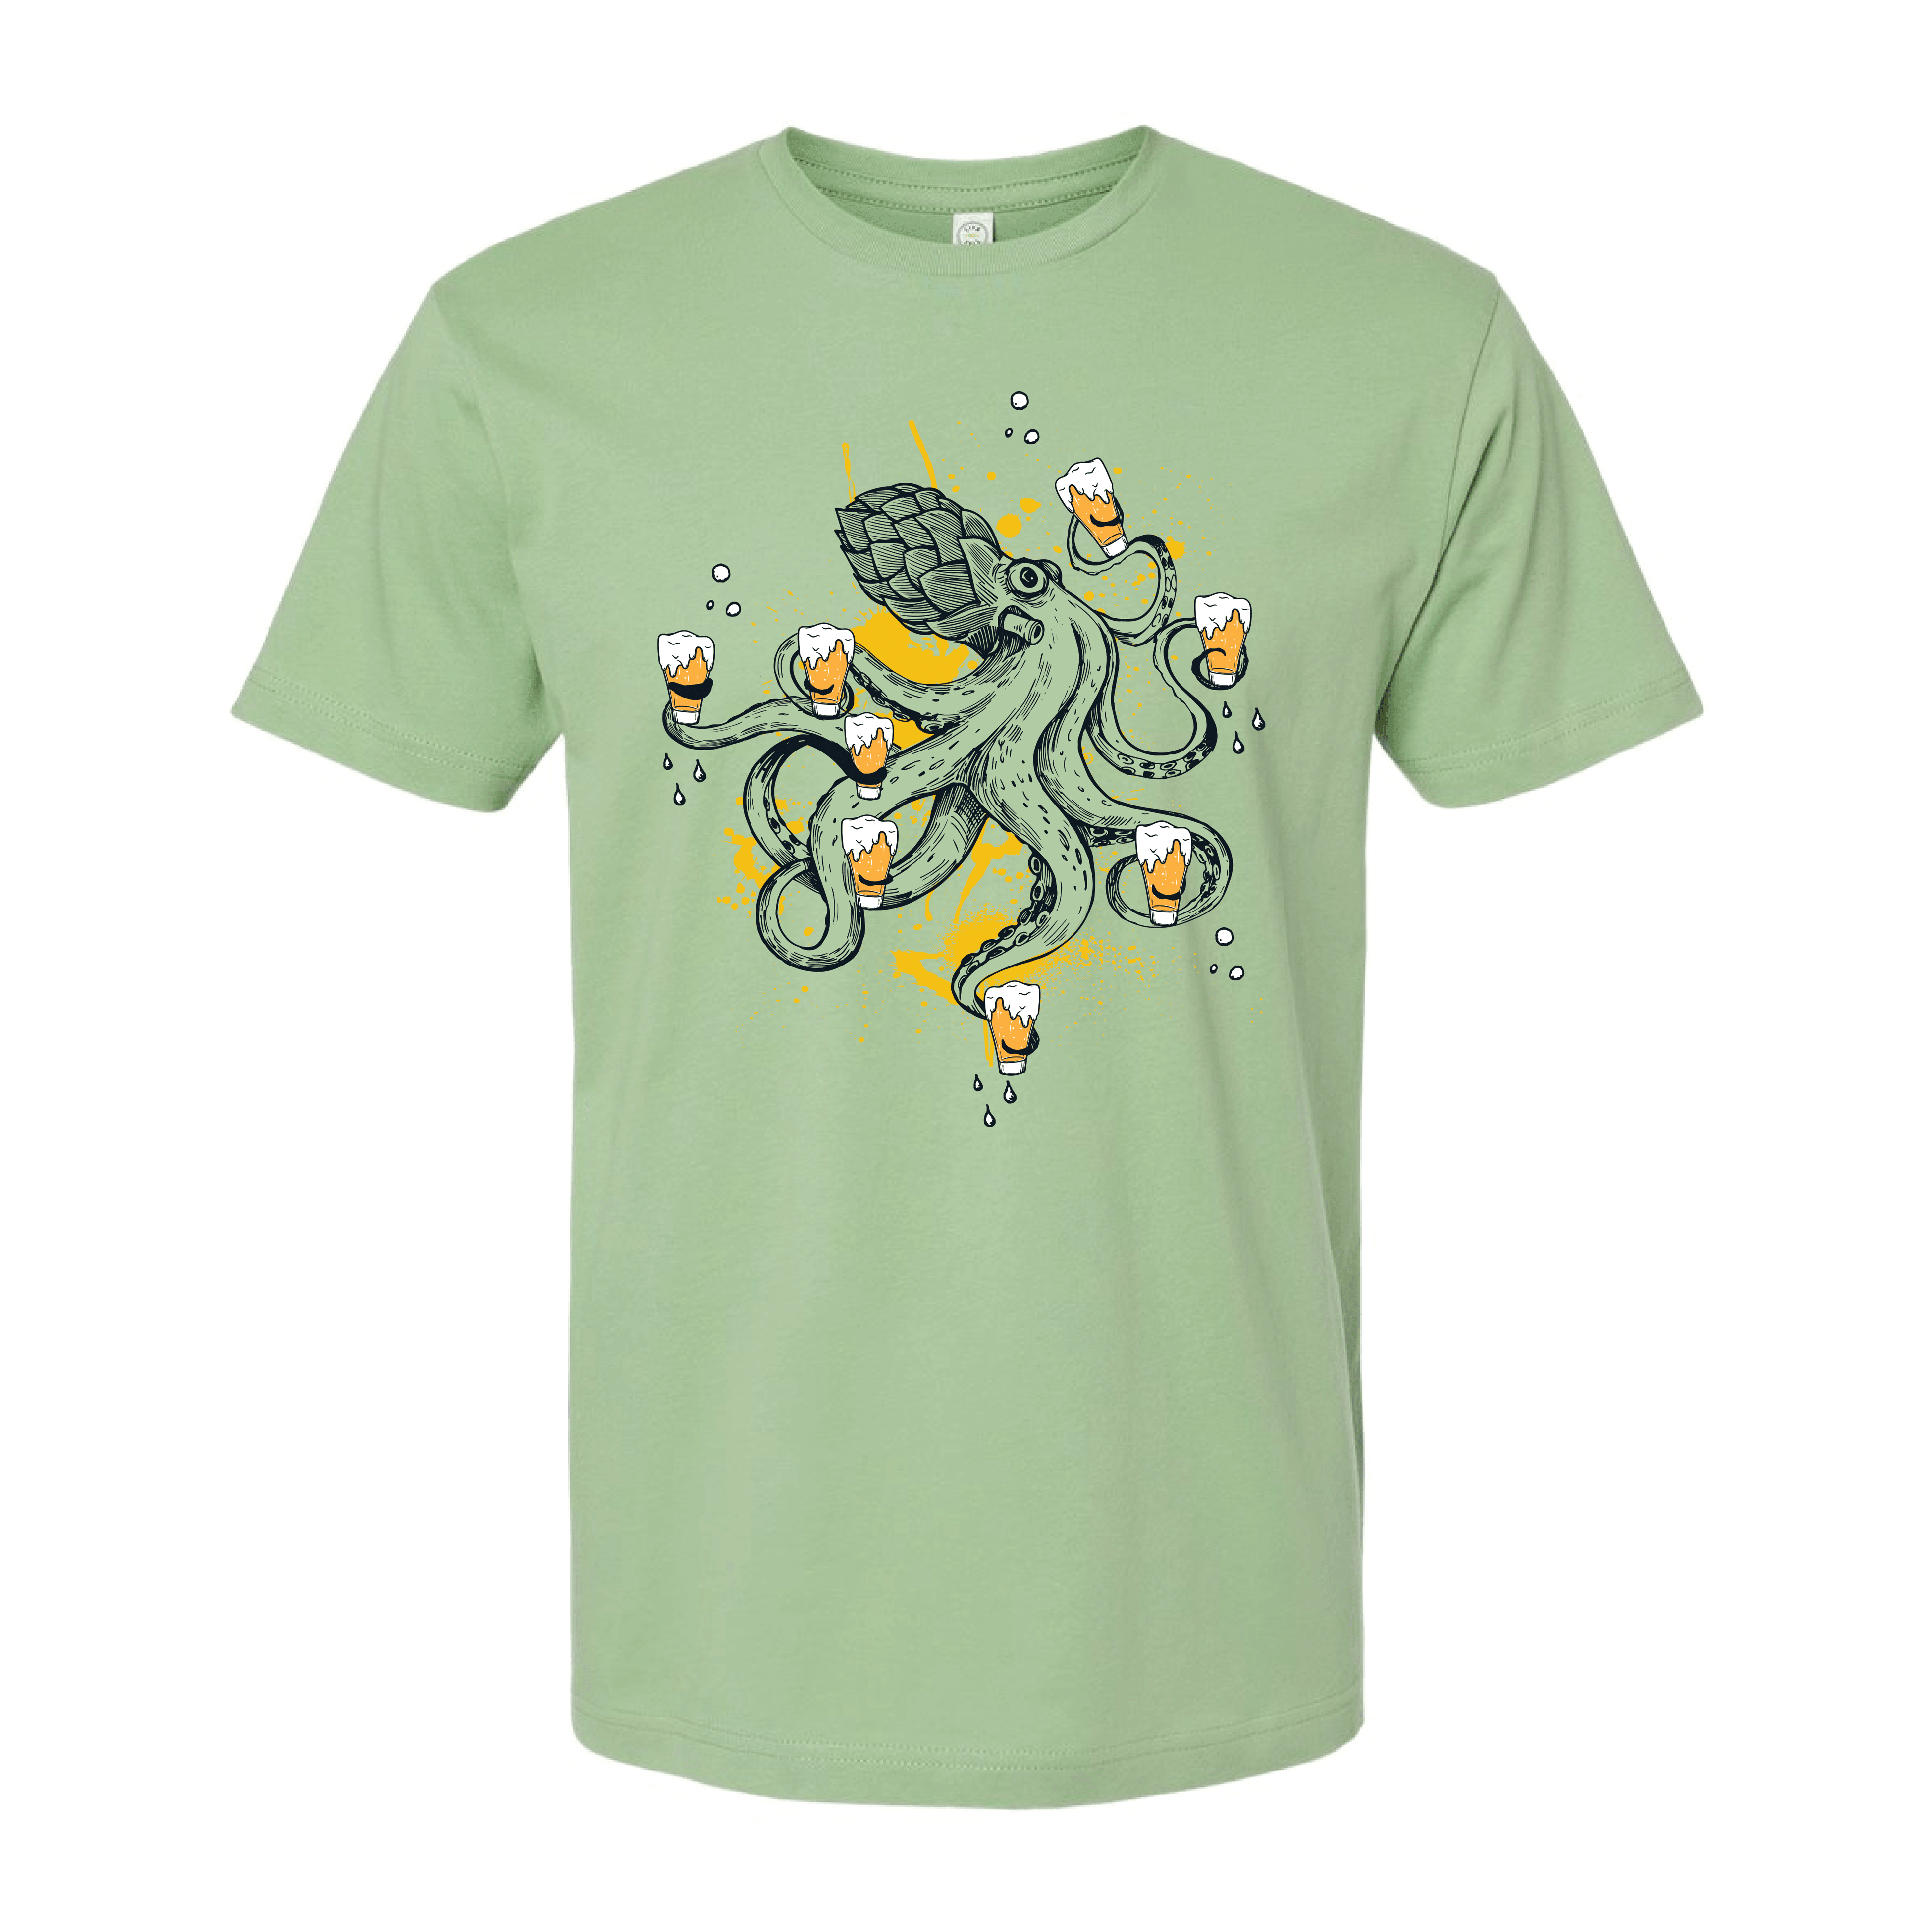 Hoptopus T-Shirt - Ales to Trails